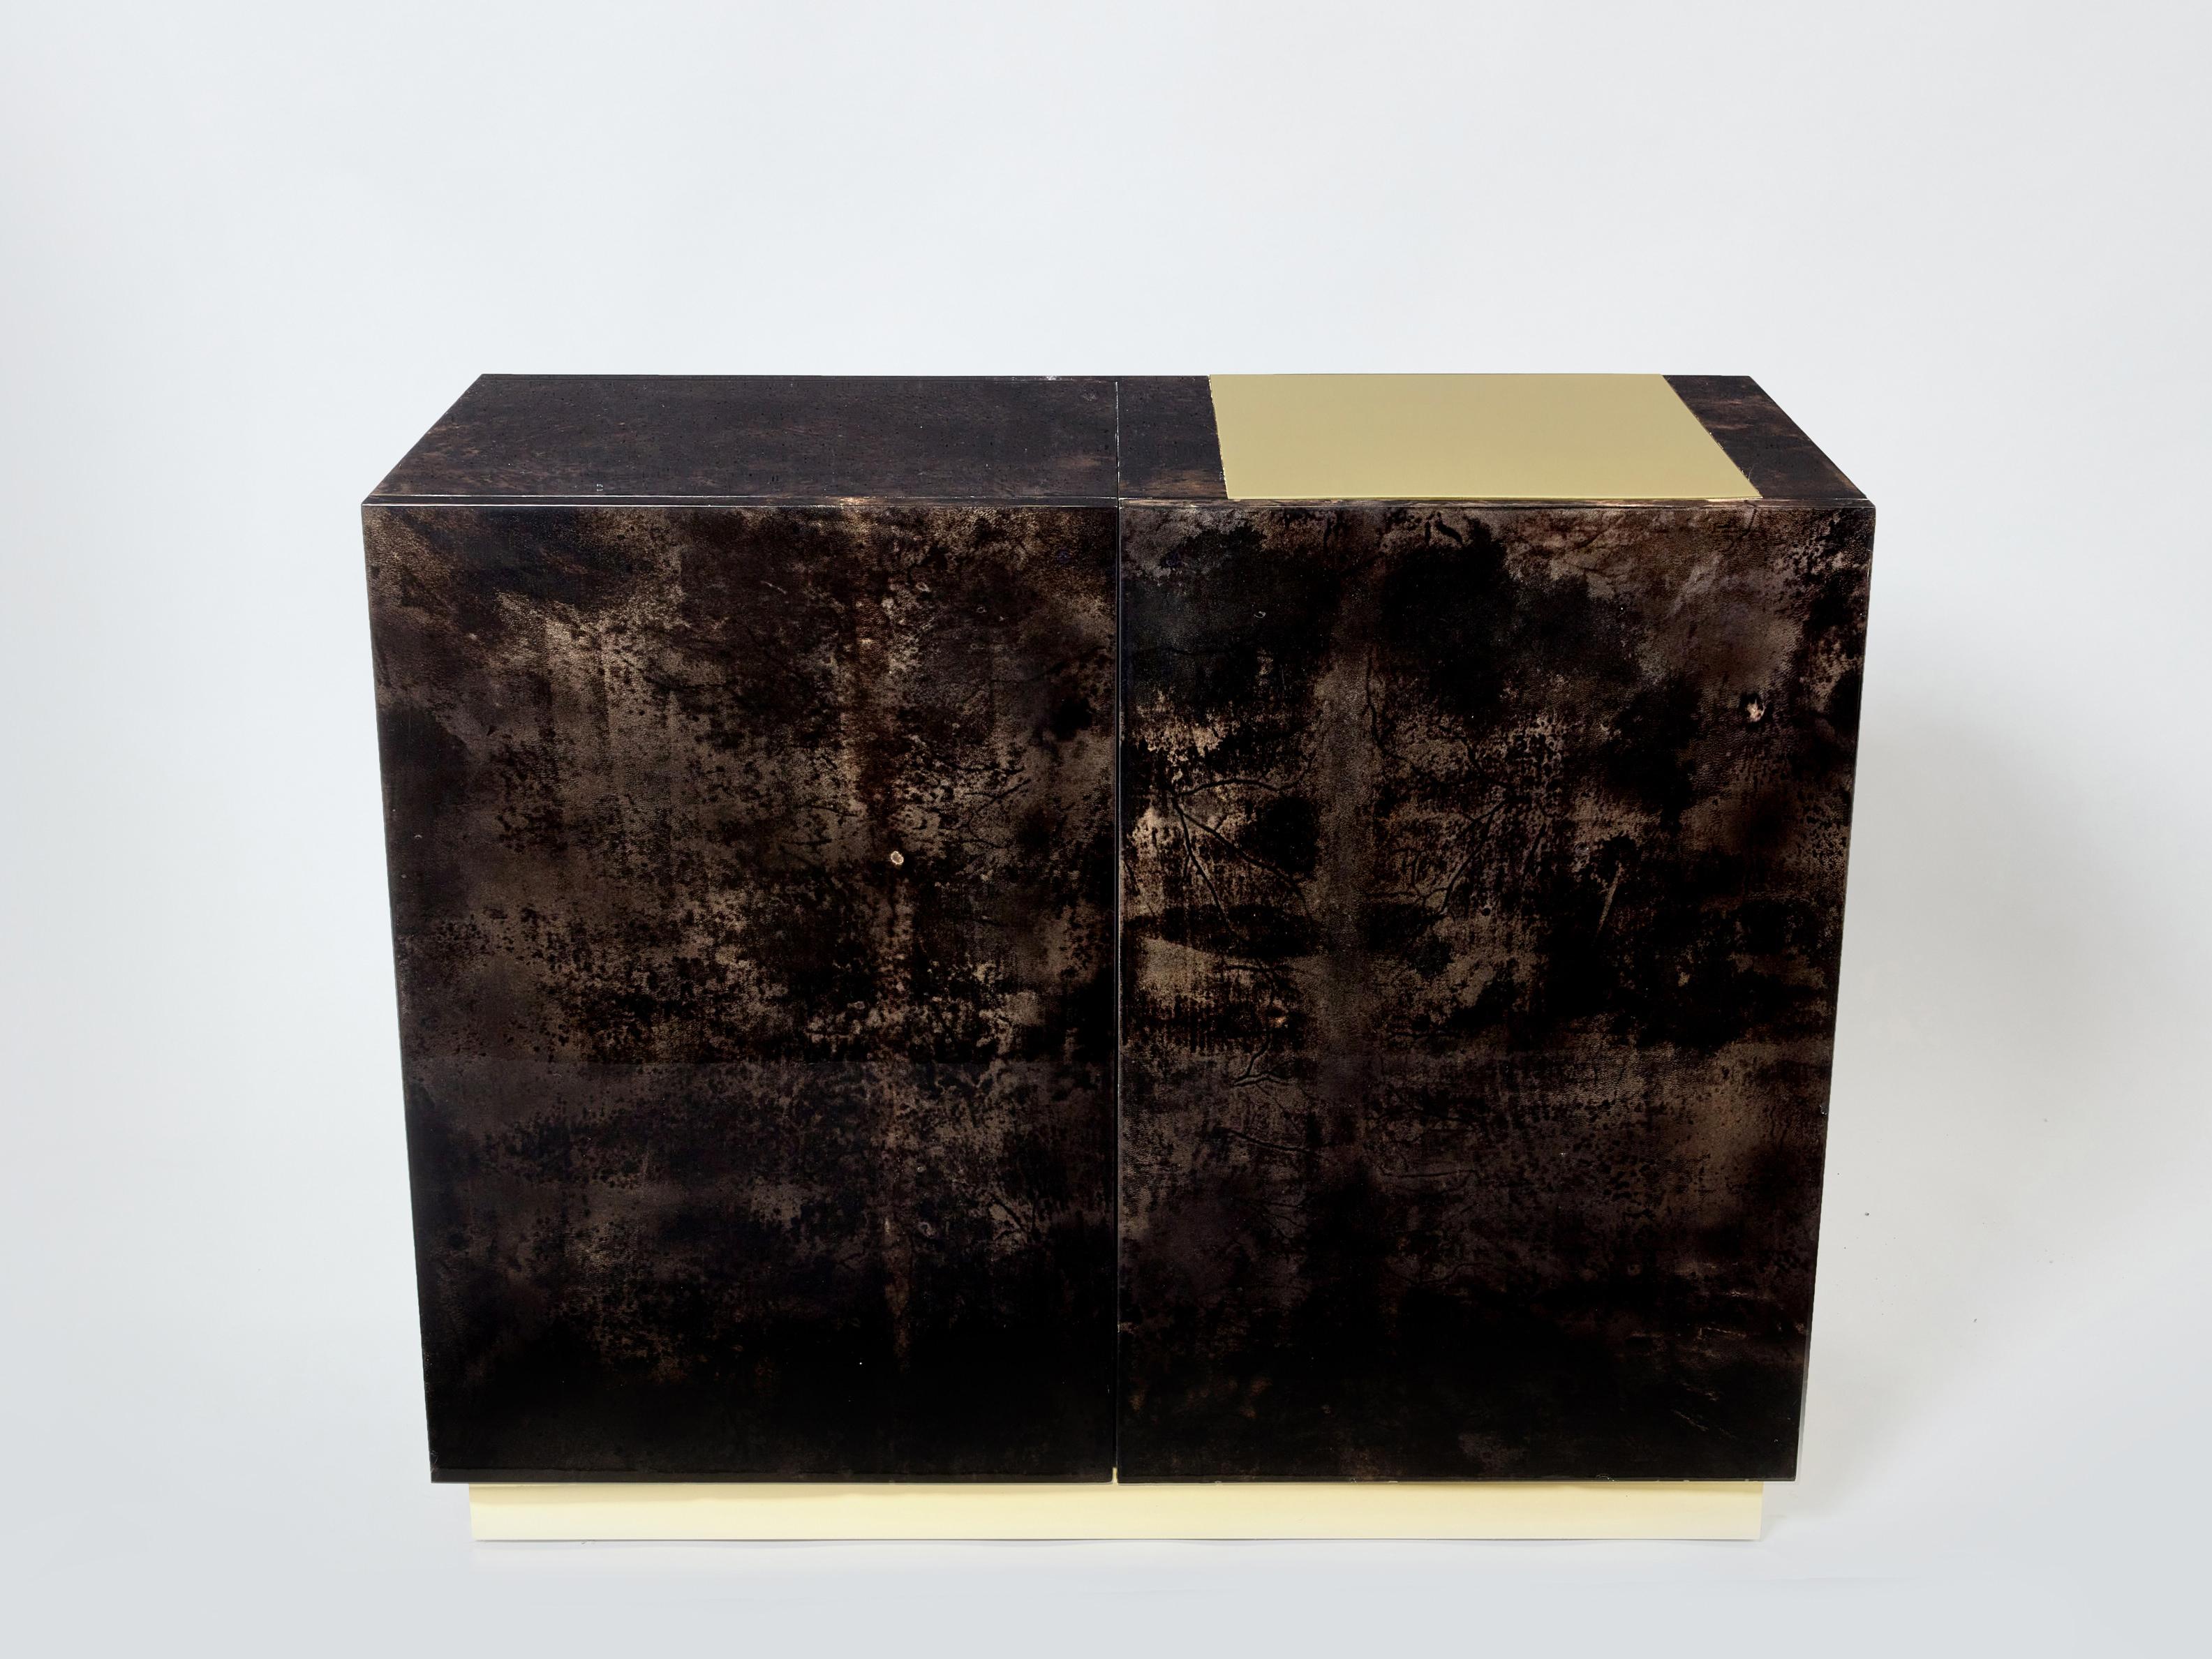 A unique and timeless vintage piece, this Aldo Tura midcentury cabinet bar feels imposing and glamourous. The varnished goatskin parchment, in rich shades of brown and dark brown, makes this cabinet typical of designer Aldo Tura. Its boxy style